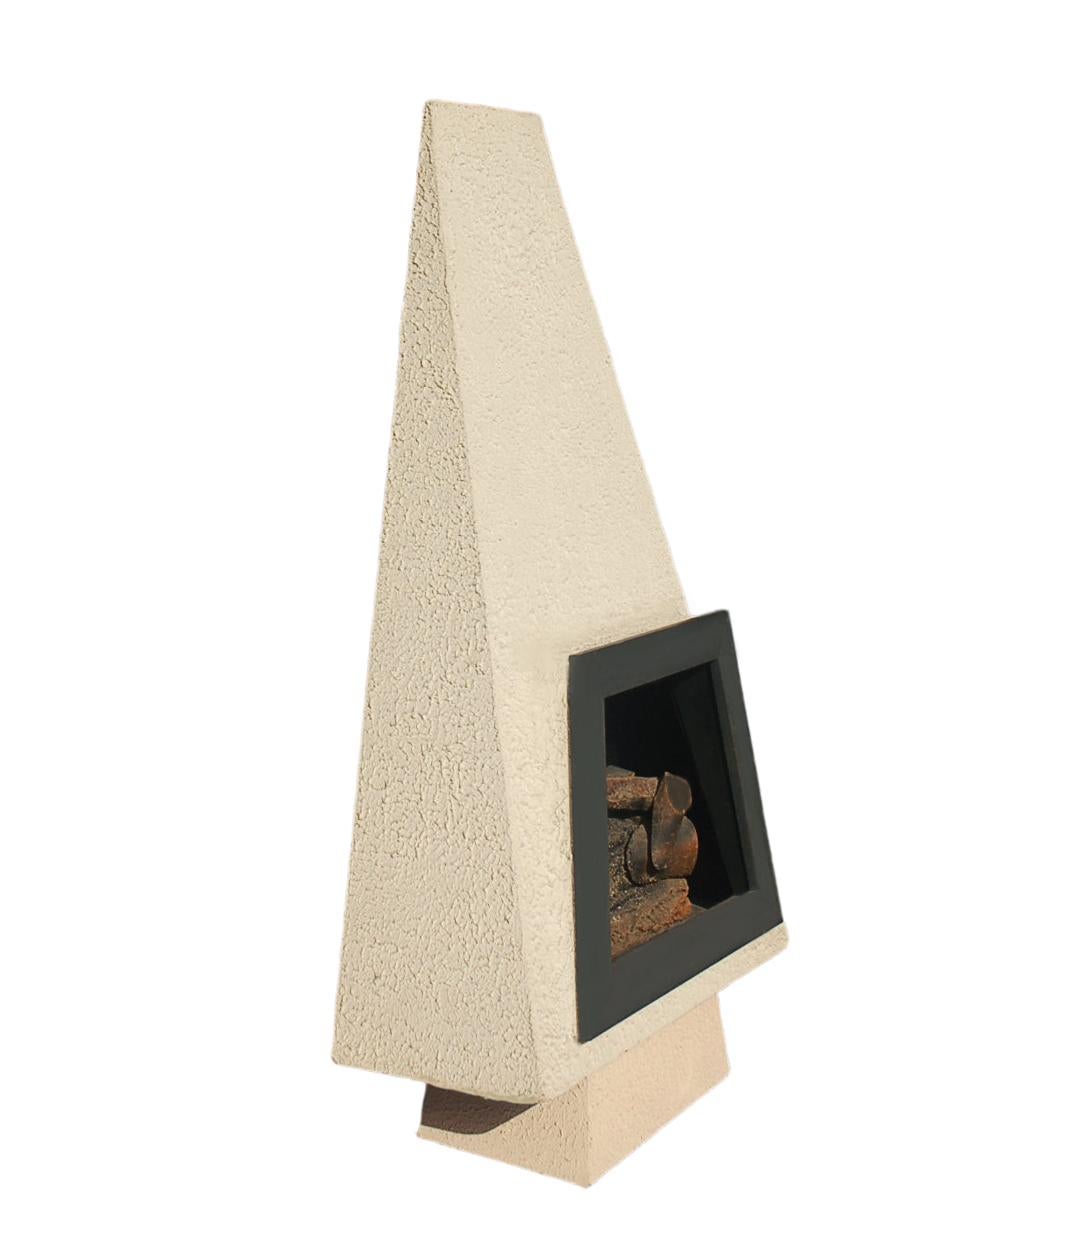 A beautiful modern form fireplace from the 1970s. It features wood and concrete construction. Plugs into wall and works with illuminated faux logs.